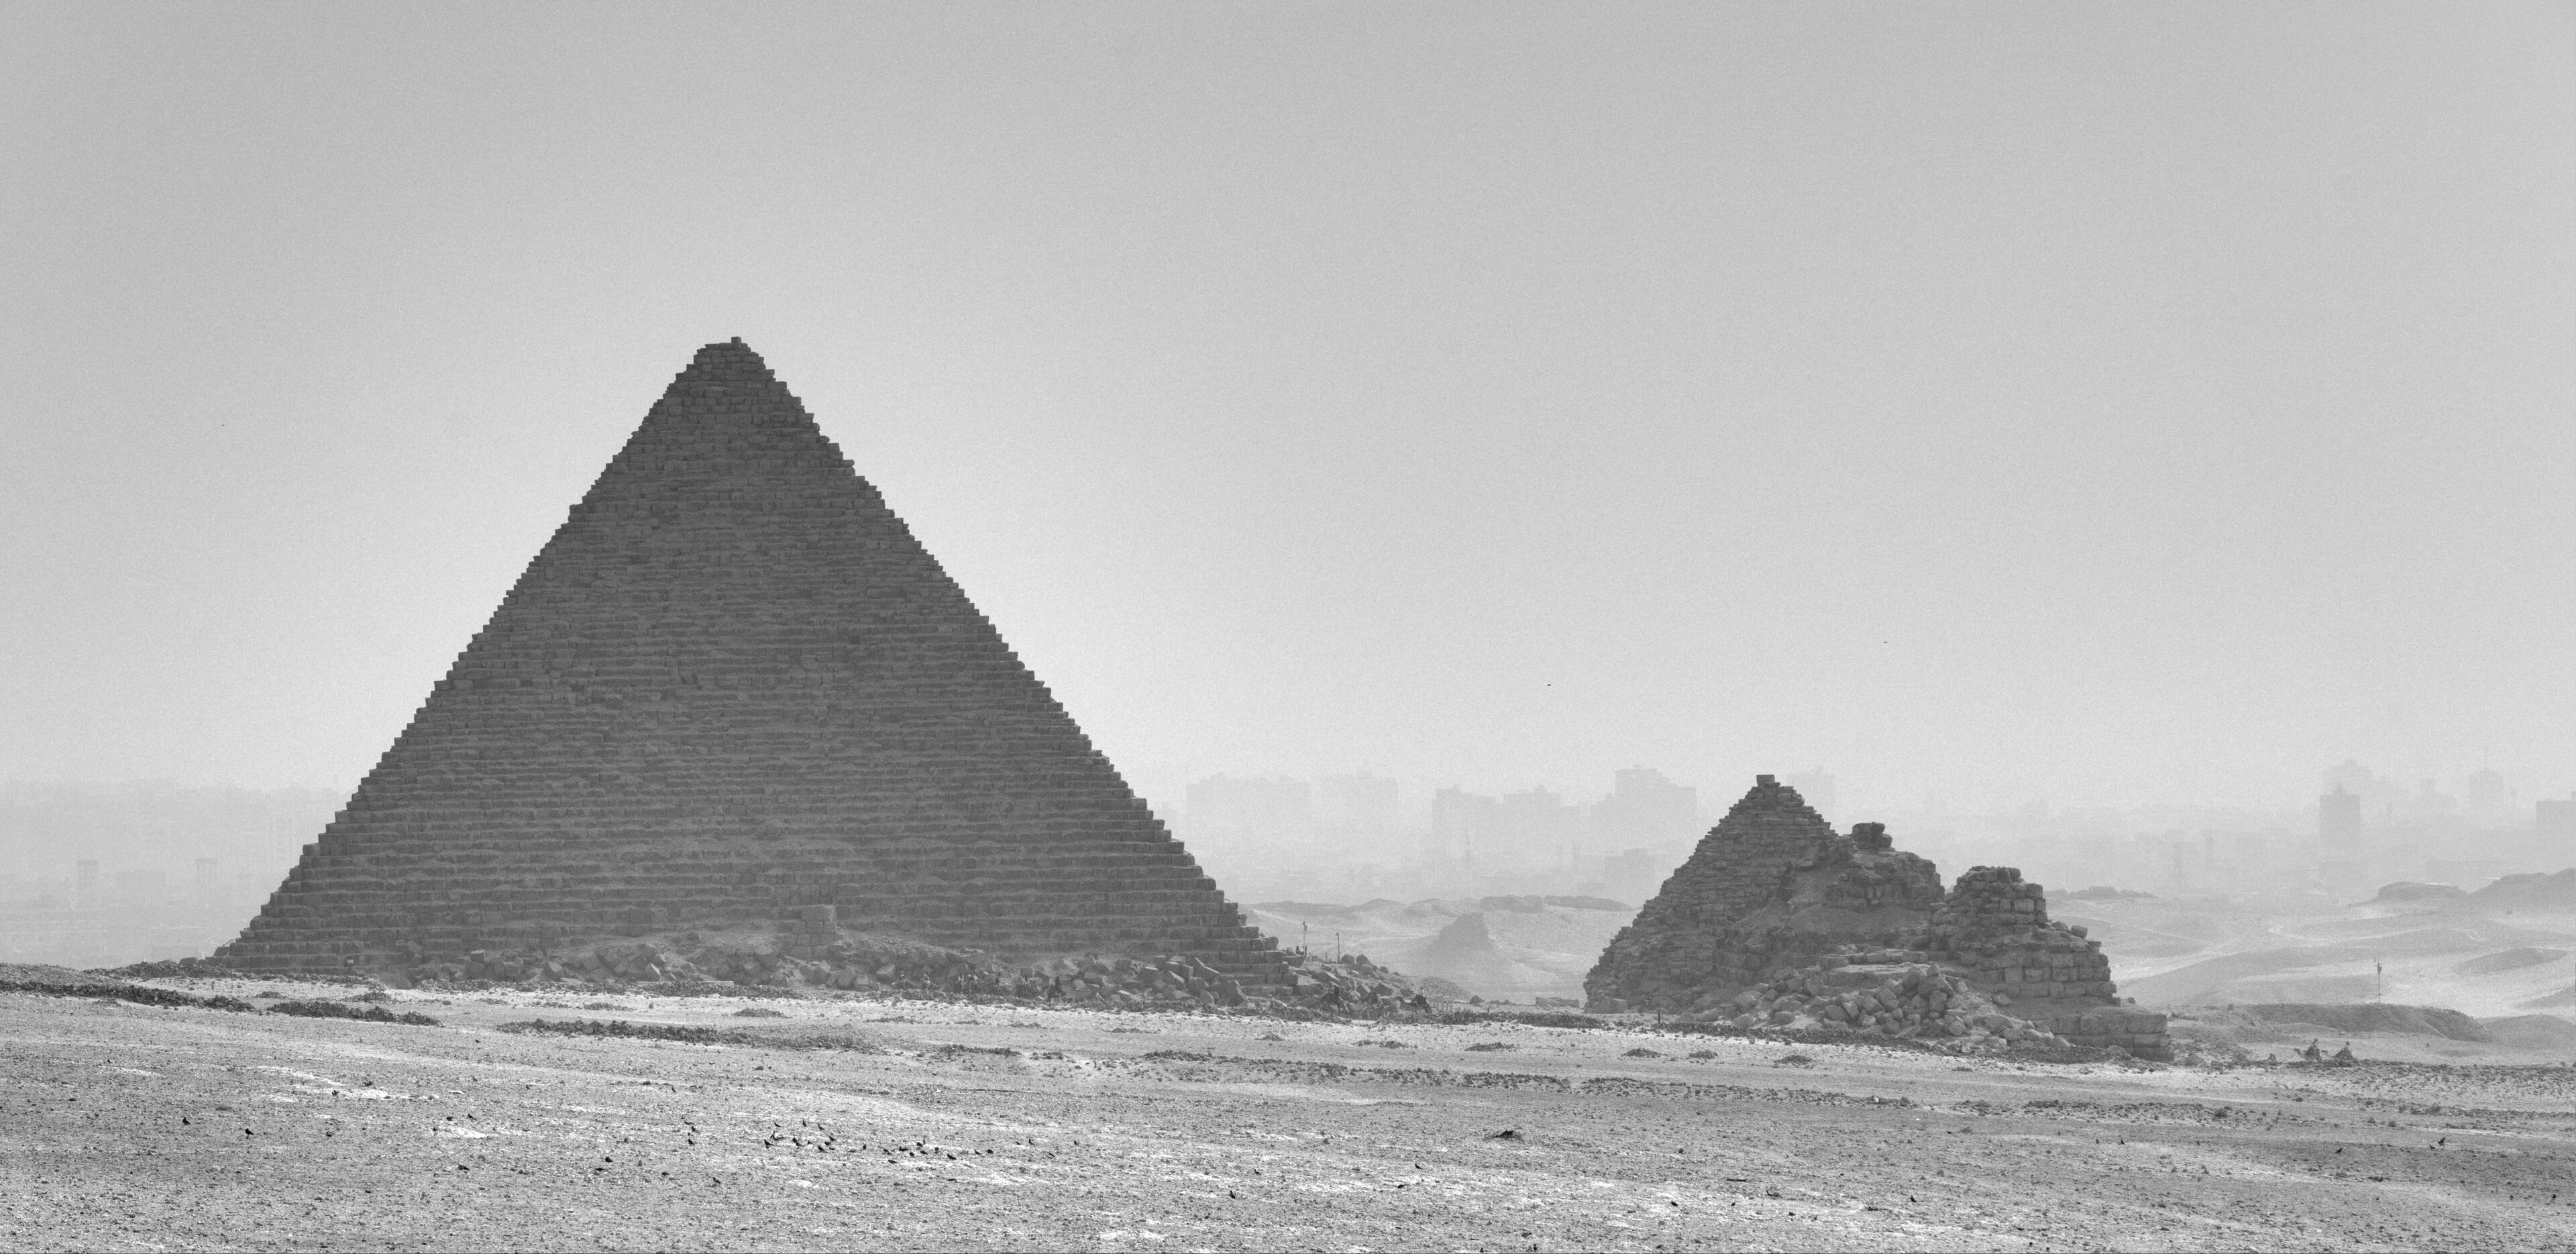 Once upon a time in Giza.